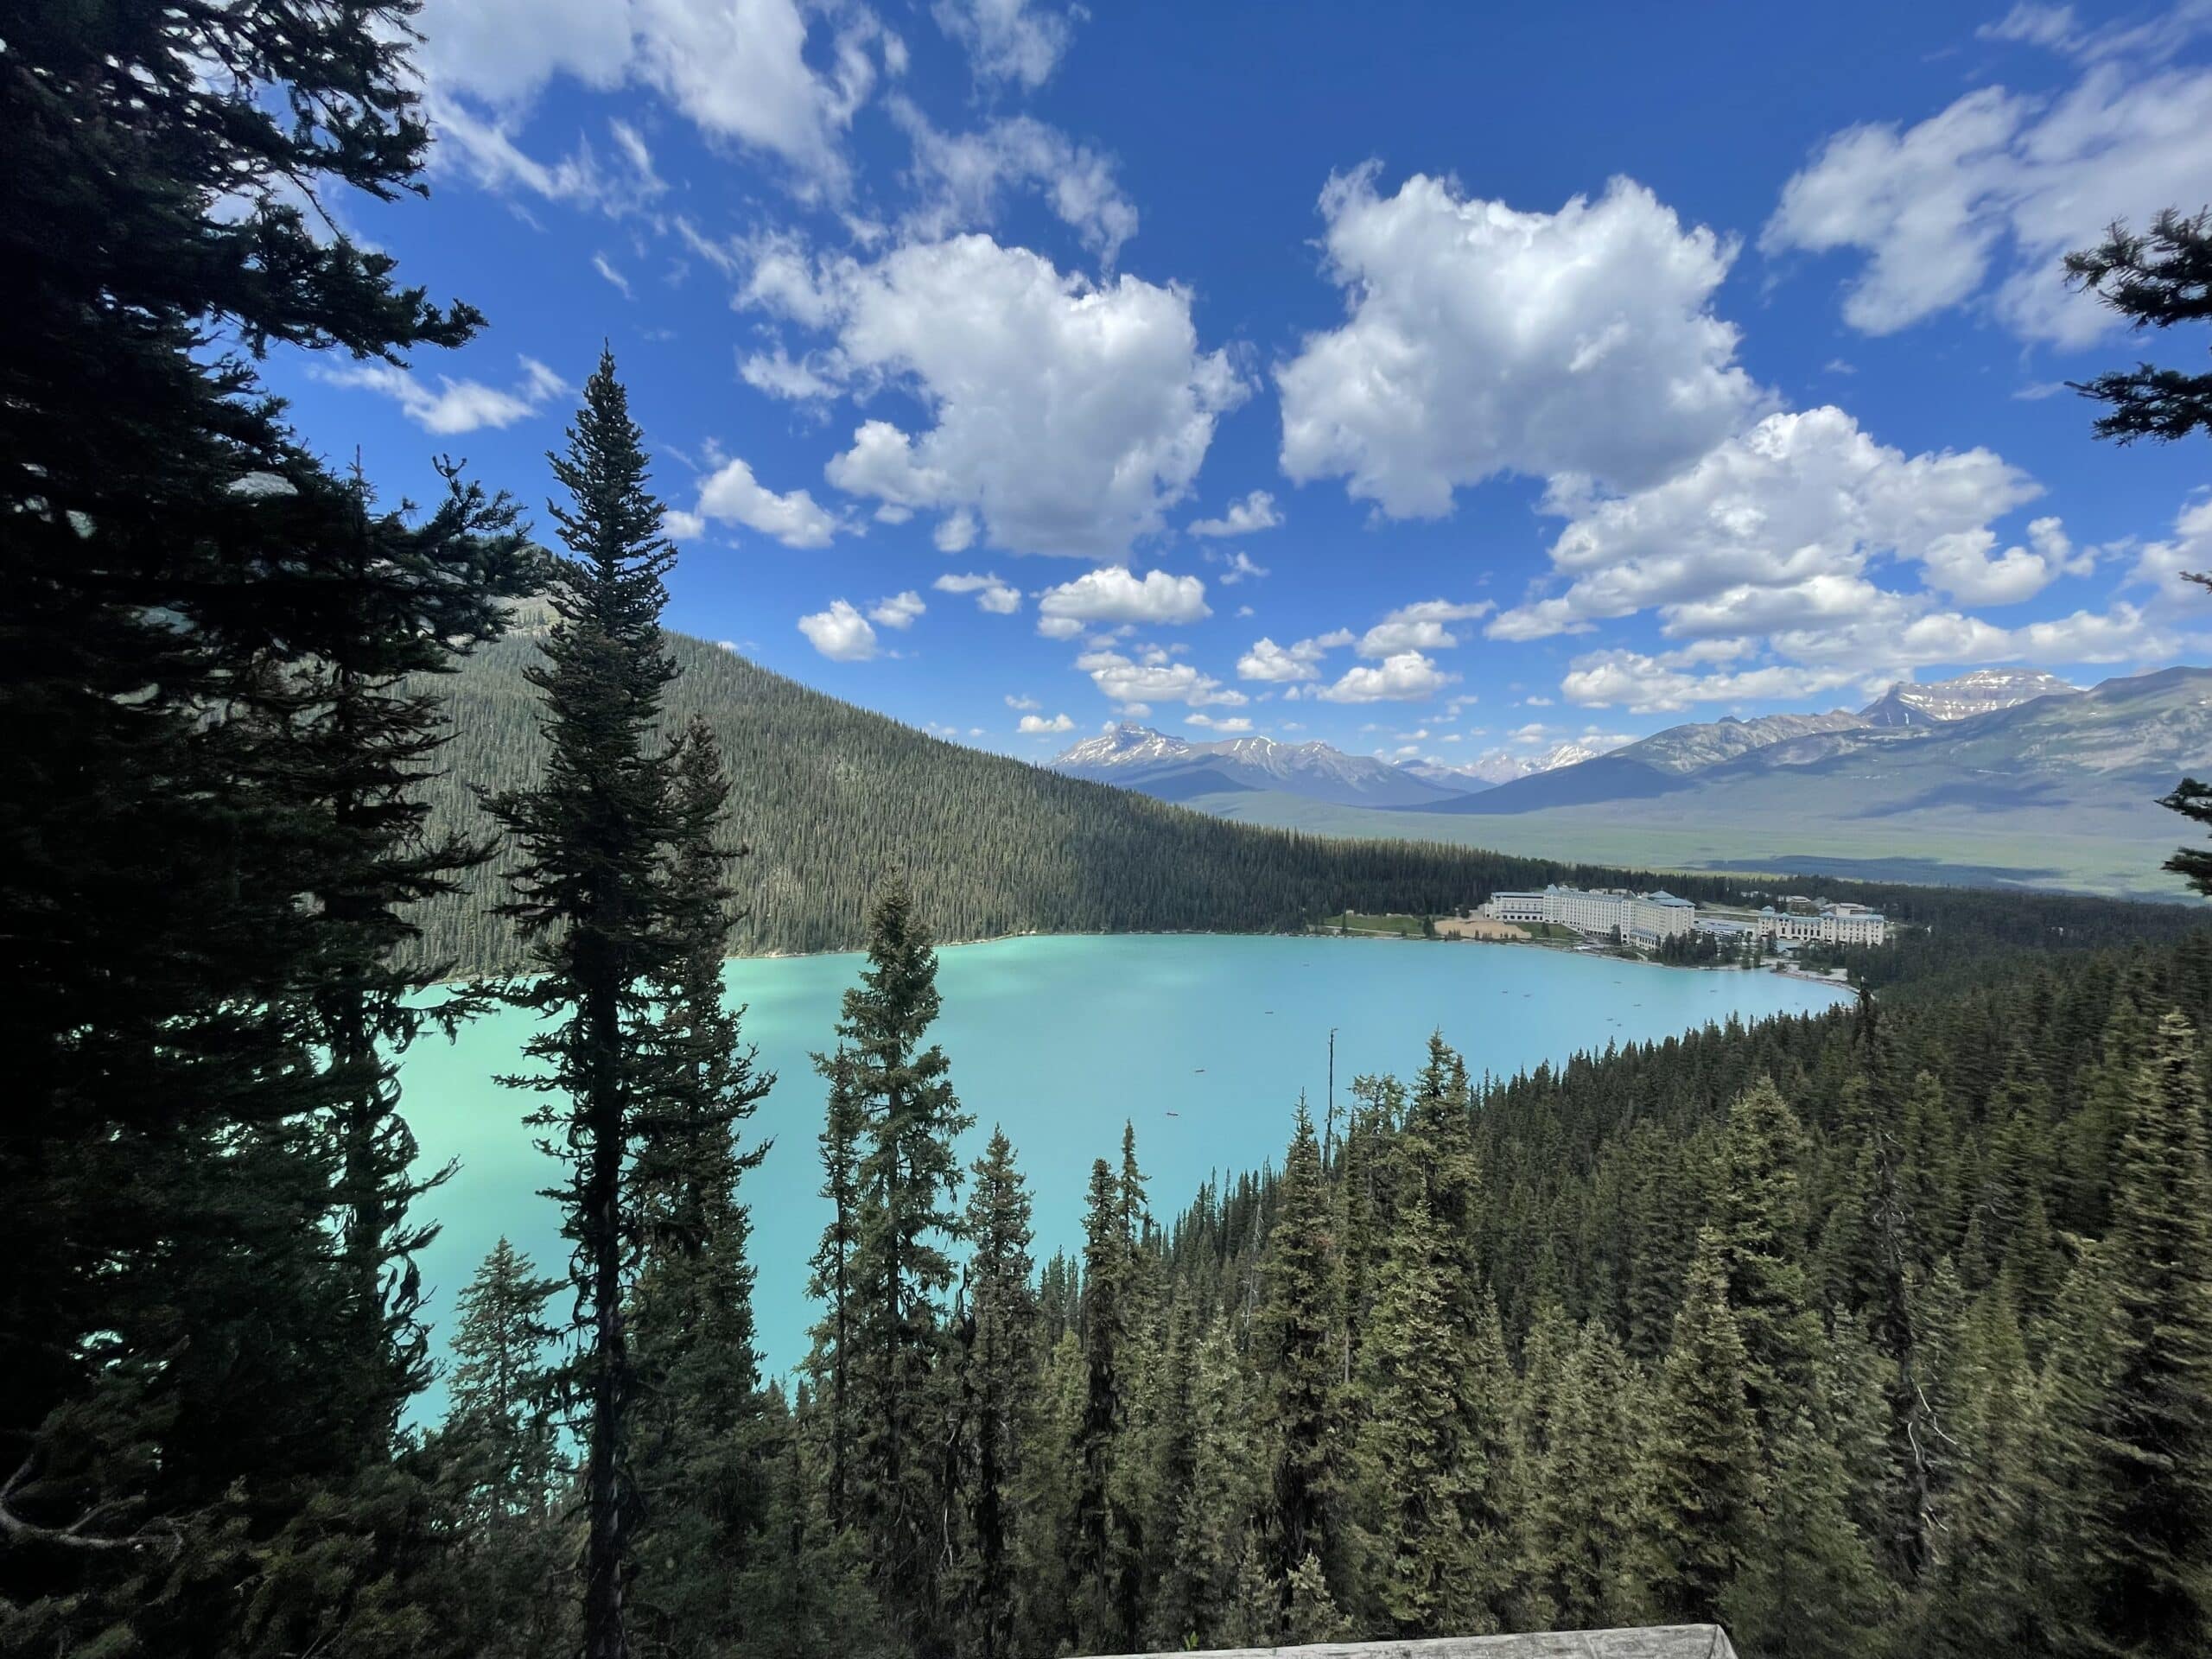 https://www.discovercanadatours.com/wp-content/uploads/2022/07/LakeLouise3-scaled.jpg